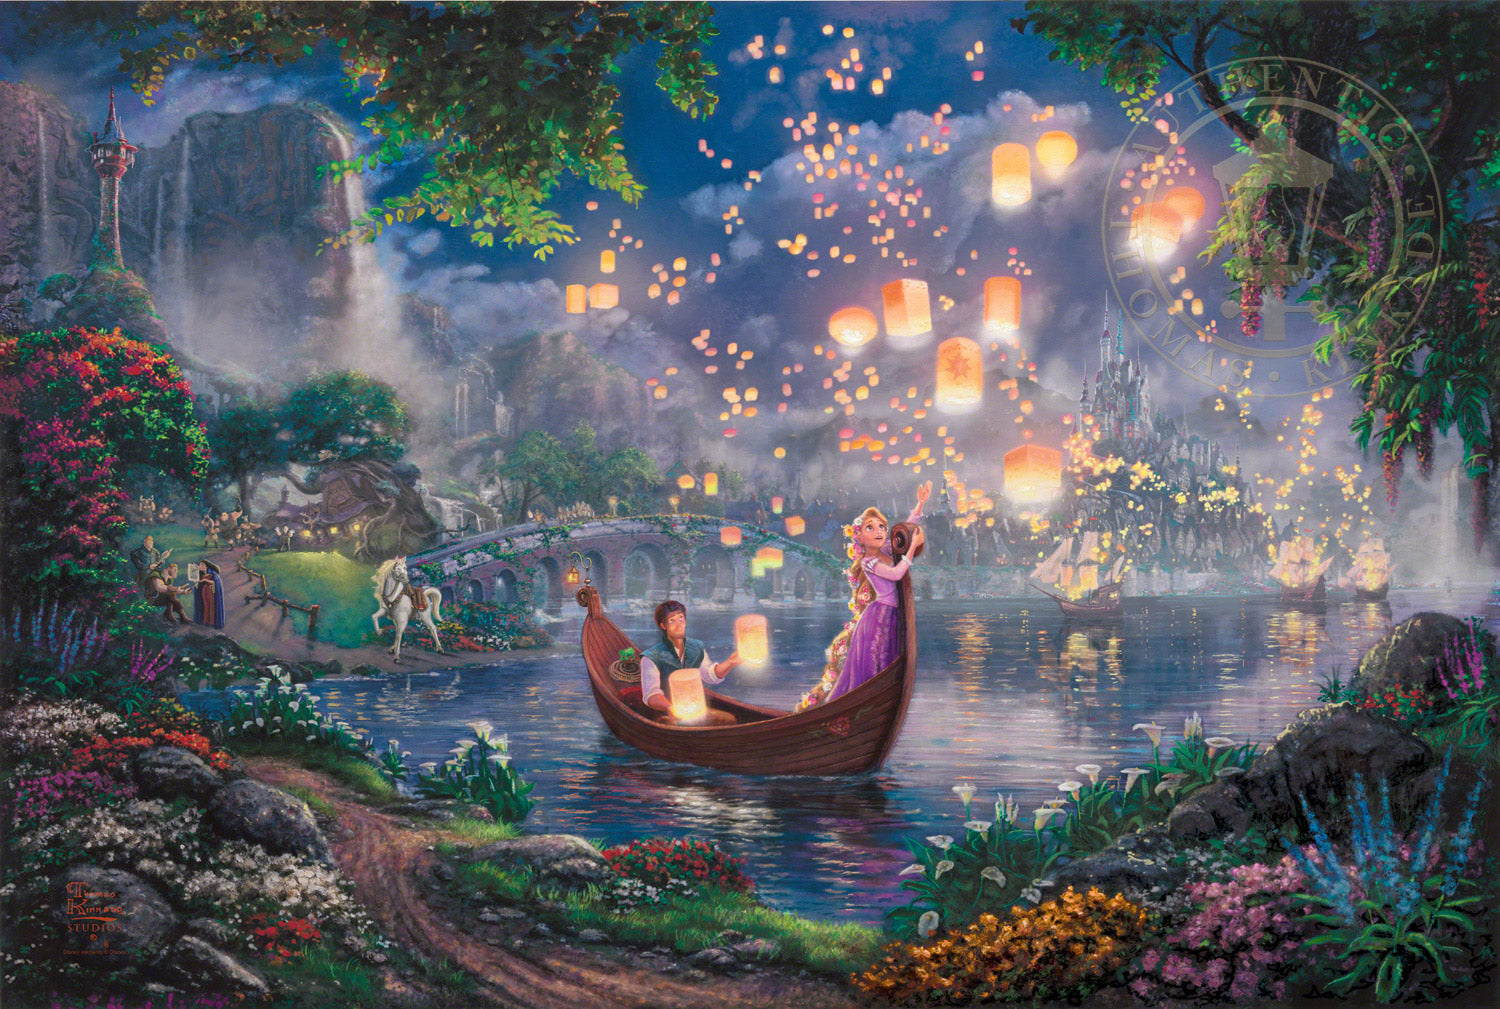 Thomas Kinkade Disney Dreams "Tangled" Limited and Open Canvas Giclee